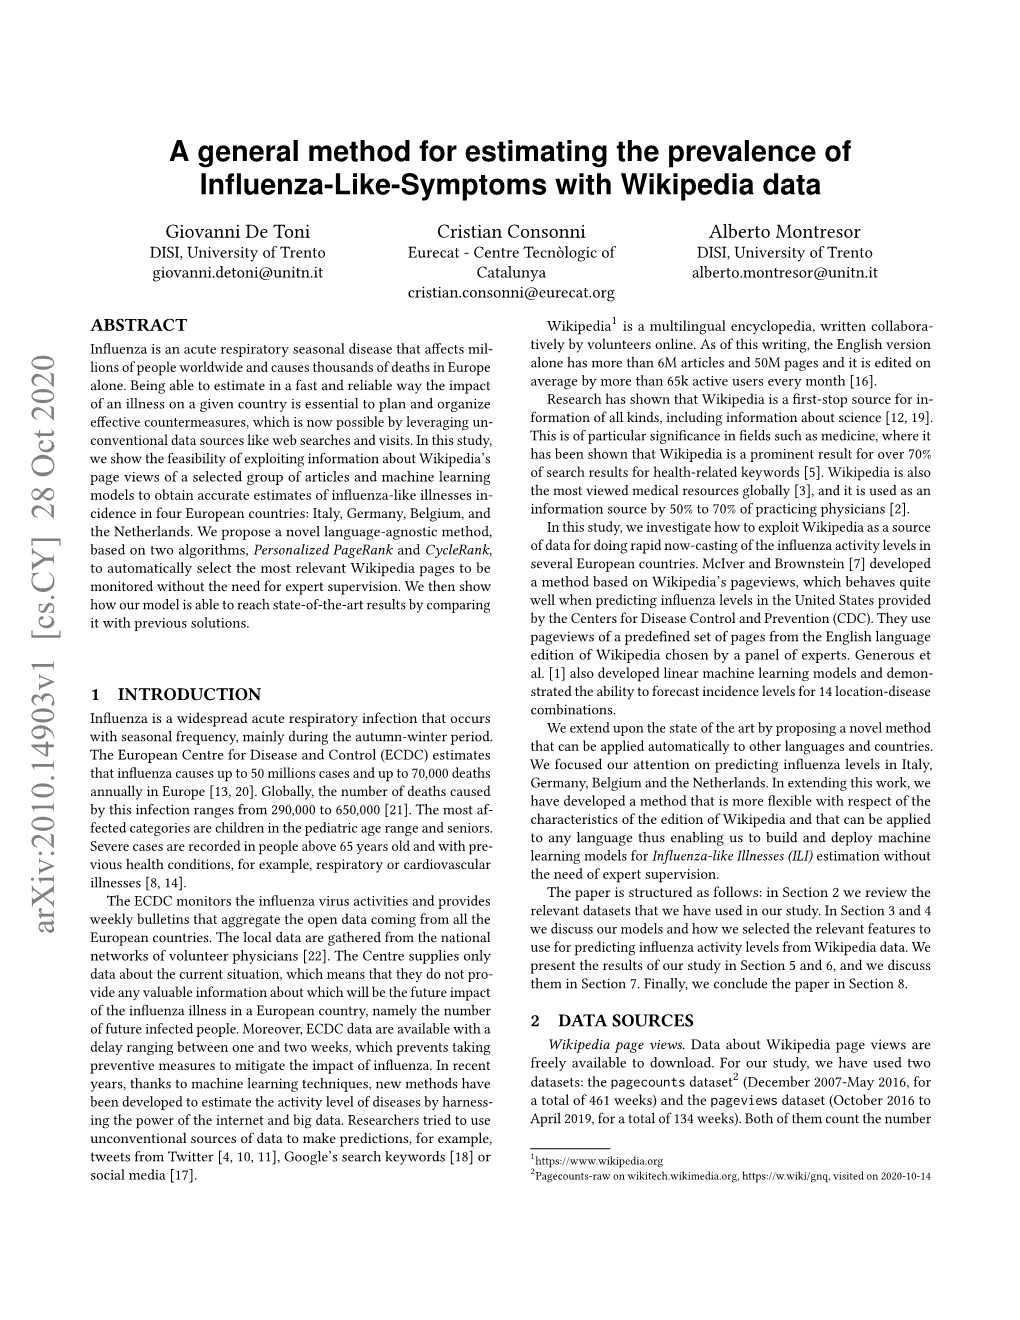 A General Method for Estimating the Prevalence of Influenza-Like-Symptoms with Wikipedia Data